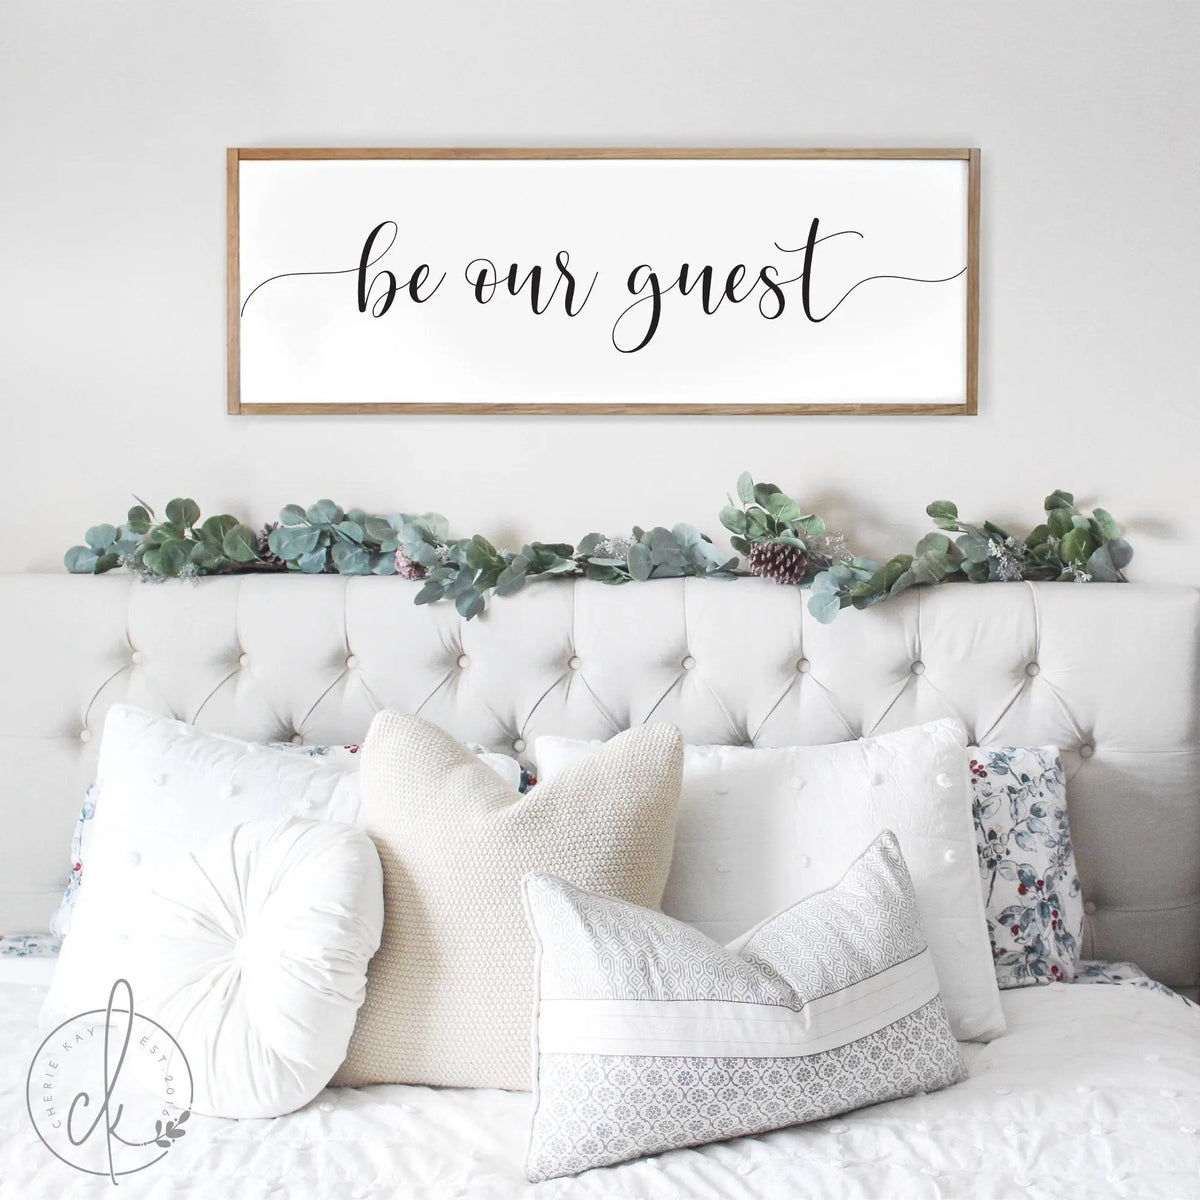 be our guest sign | sign for guest bedroom | guest room wall decor | be our guest wood sign | farmhouse wall decor | farmhouse sign | D2